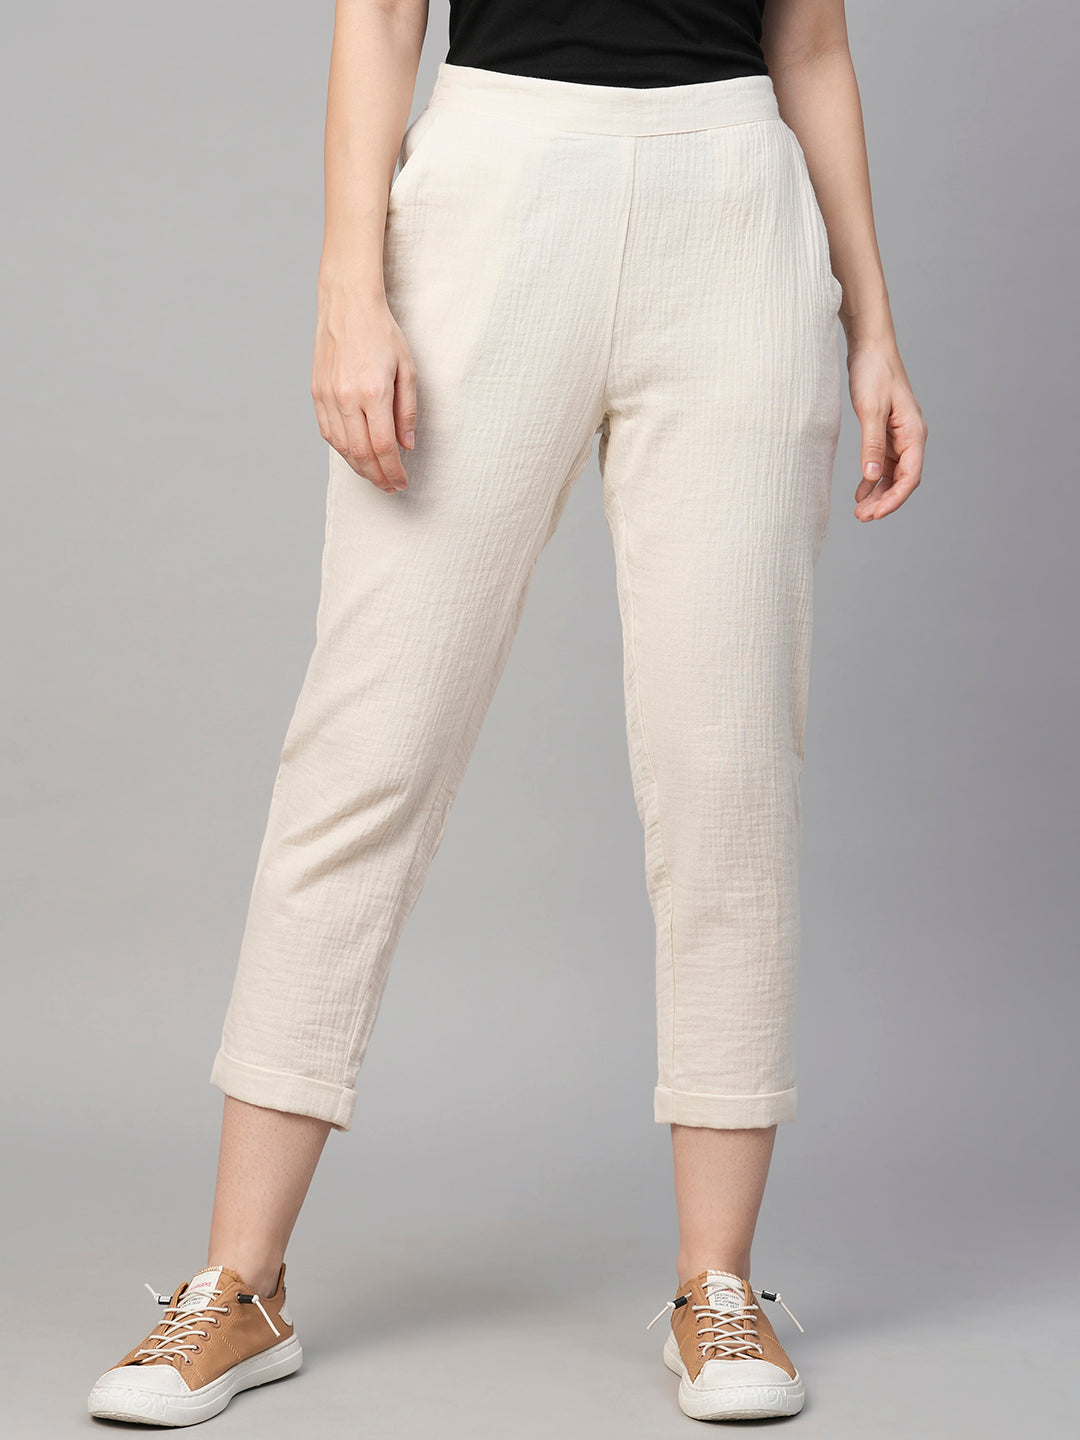 Women's Cotton Offwhite Regular Fit Pant